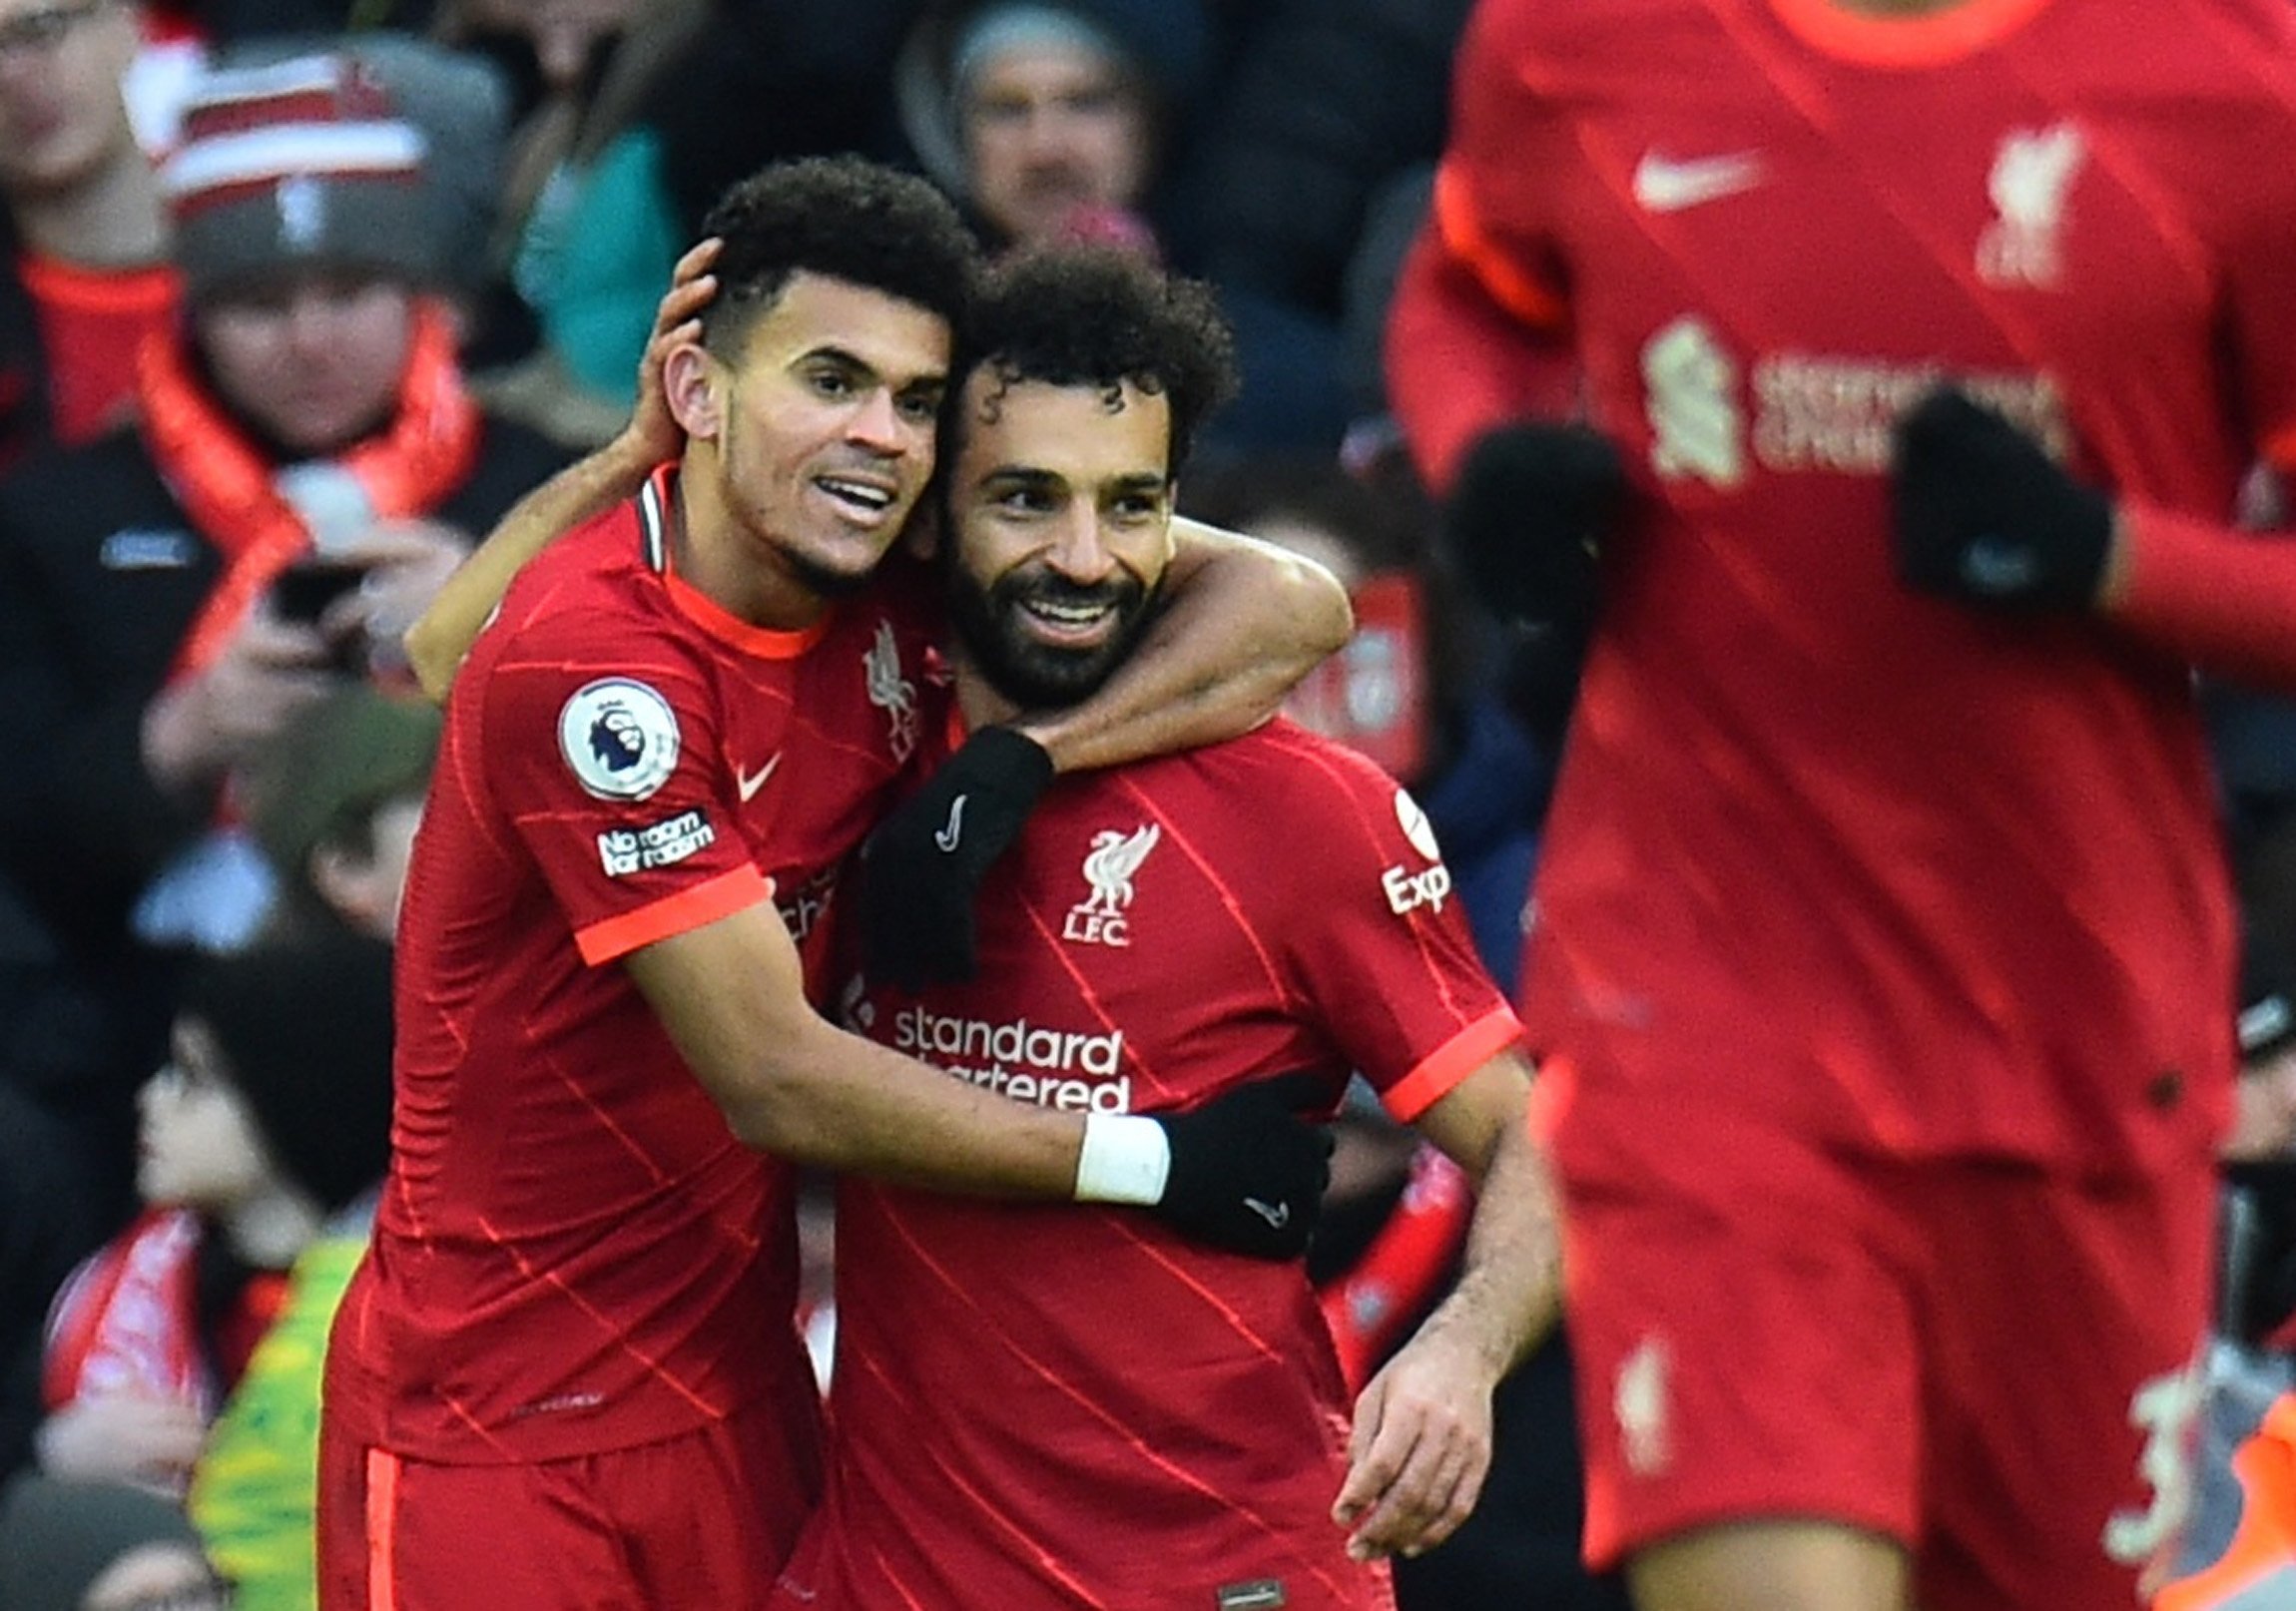 Liverpool's Luis Diaz celebrates scoring their third goal with Mohamed Salah (R) during the English Premier League match at Anfield Stadium, Liverpool, U.K., Feb. 19, 2022.(Reuters Photo)